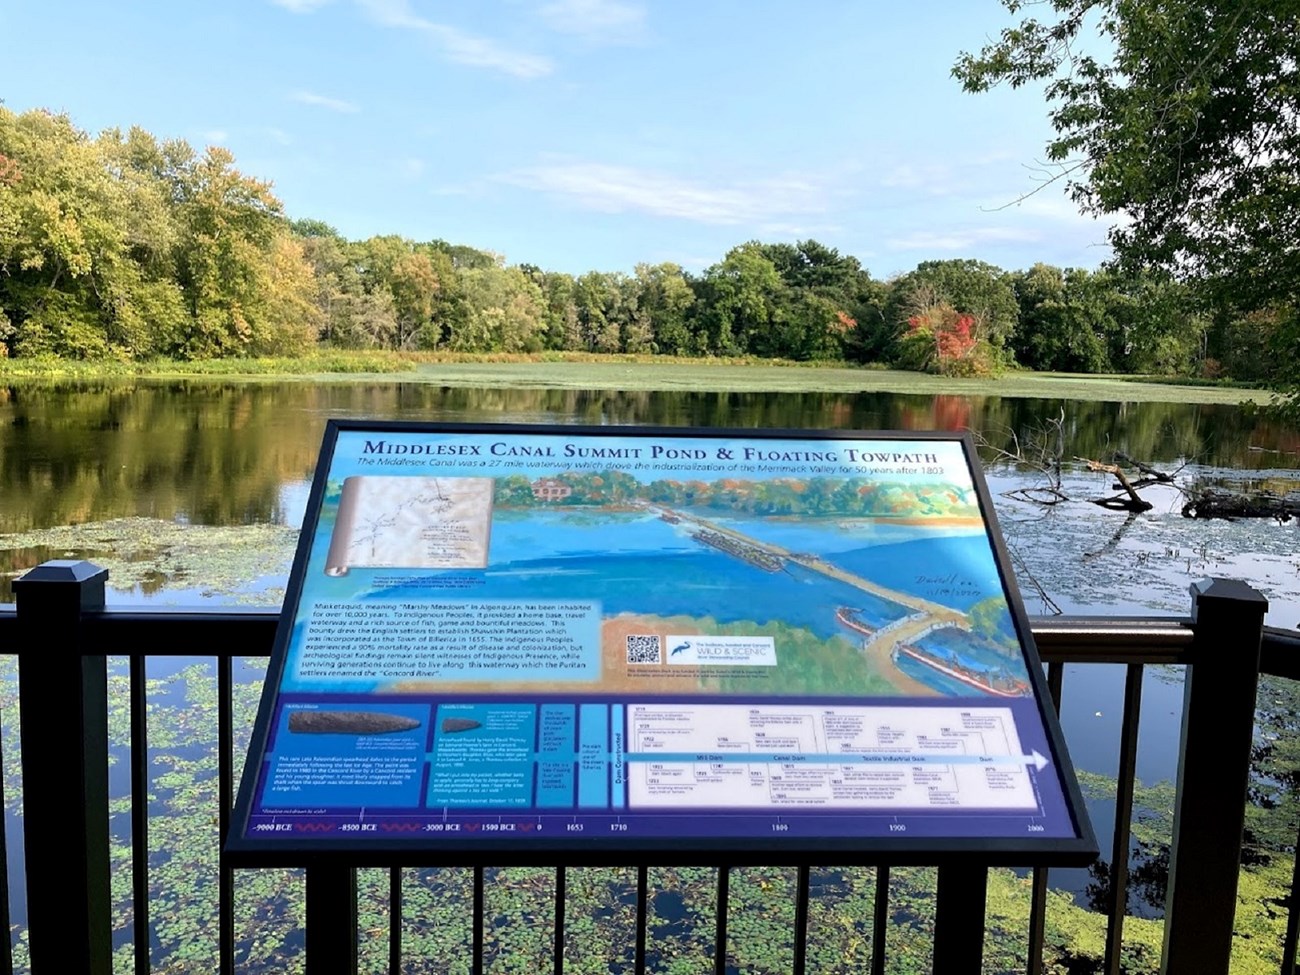 A colorful wayside titled "Middlesex Canal Summit Pond & Floating Towpath" displayed in front of a calm pond surrounded by trees